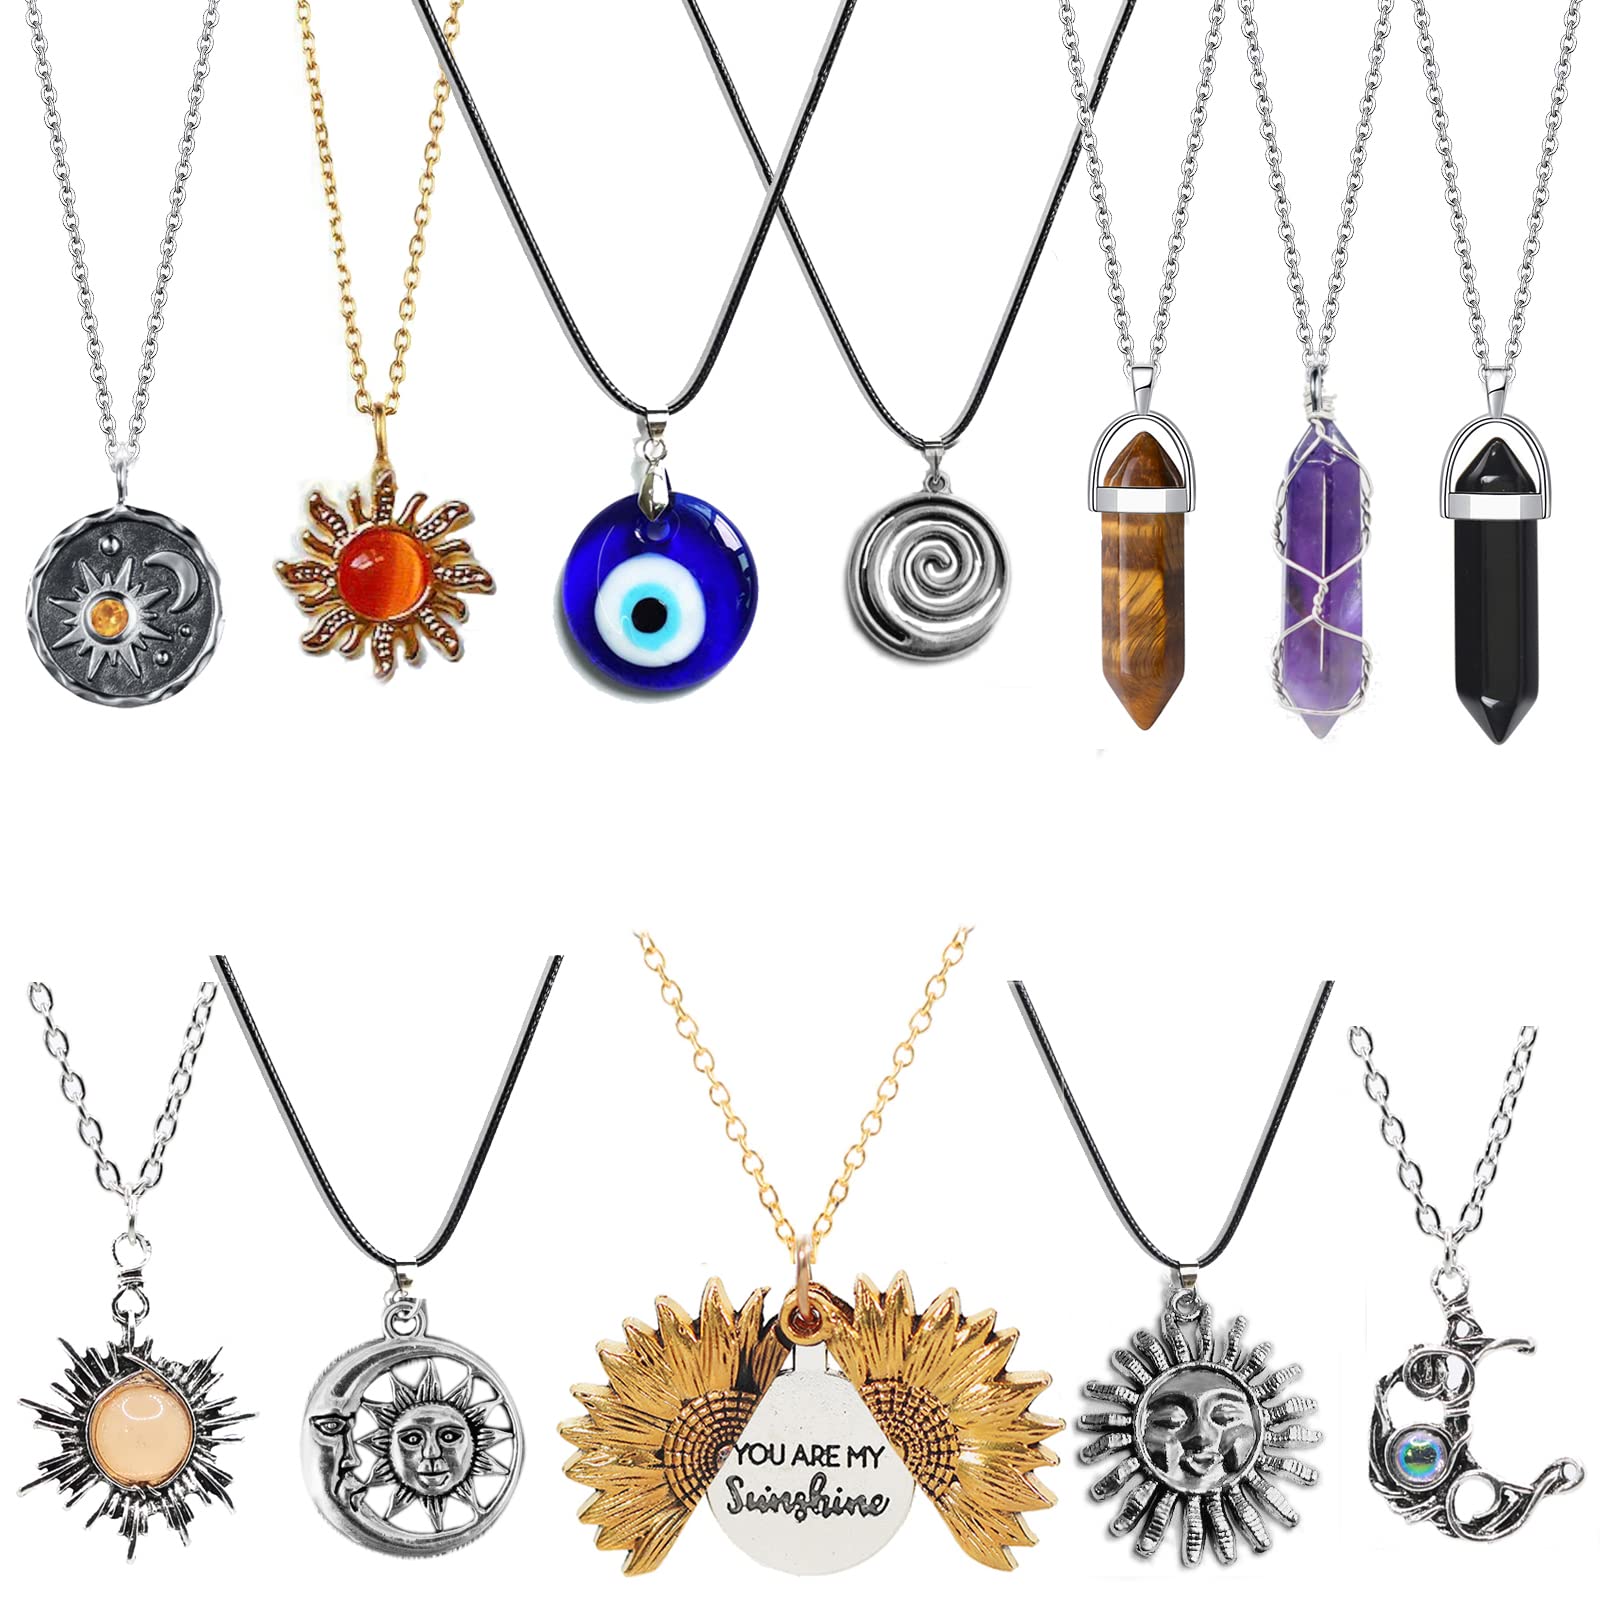 YIISIIY 12 Pcs Crystal Pendant Necklace Evil Eye Necklace Sunflower Necklace Moon and Sun Hippie Necklace Indie Aesthetic Jewelry Accessories Set for Women Men Girls